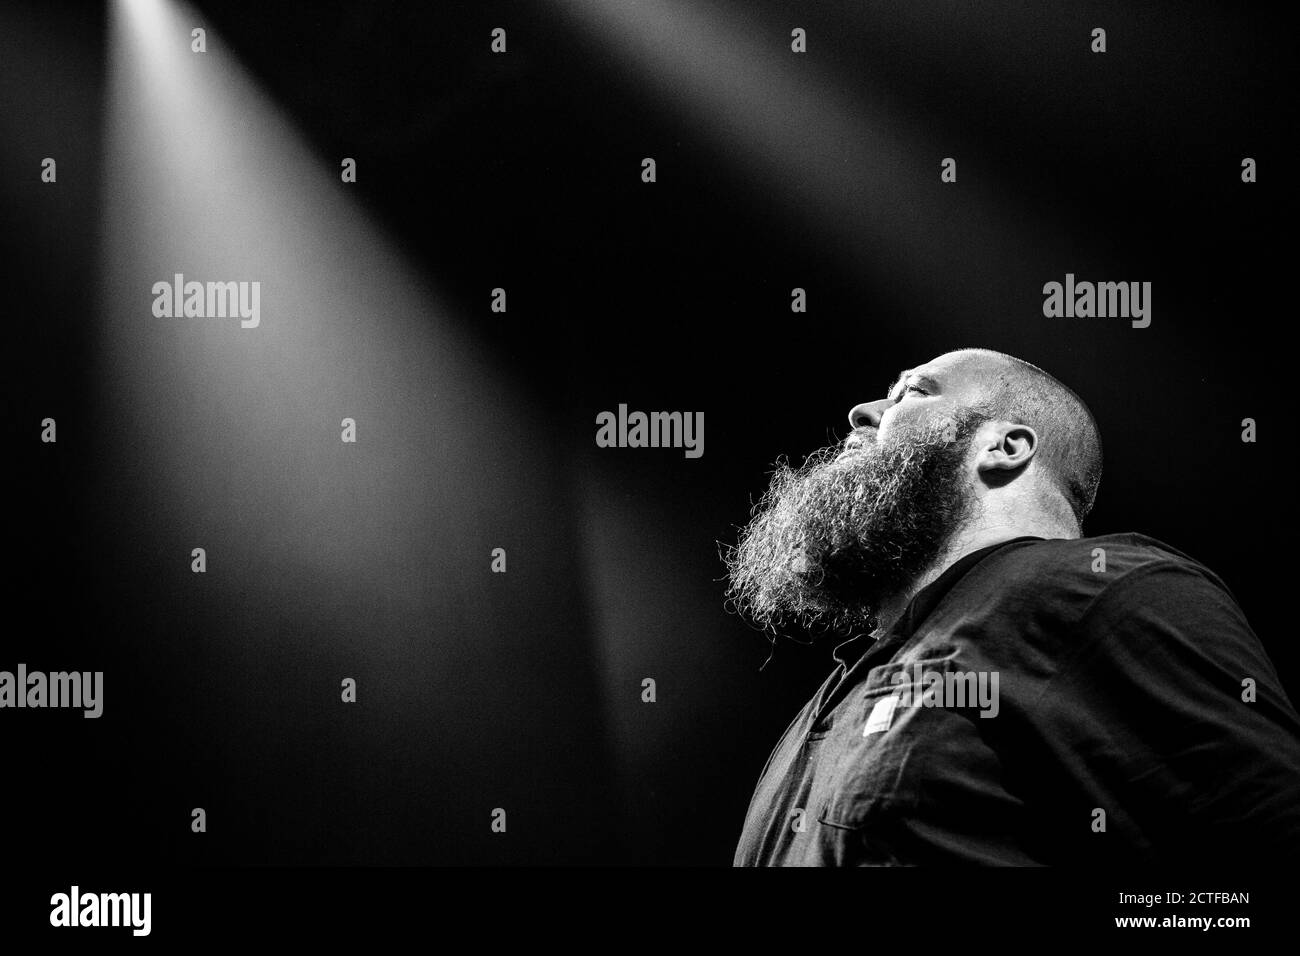 Roskilde, Denmark. 29th, June 2016. The American rapper Action Bronson performs a live concert during the Danish music festival Roskilde Festival 2016. (Photo credit: Gonzales Photo - Lasse Lagoni). Stock Photo